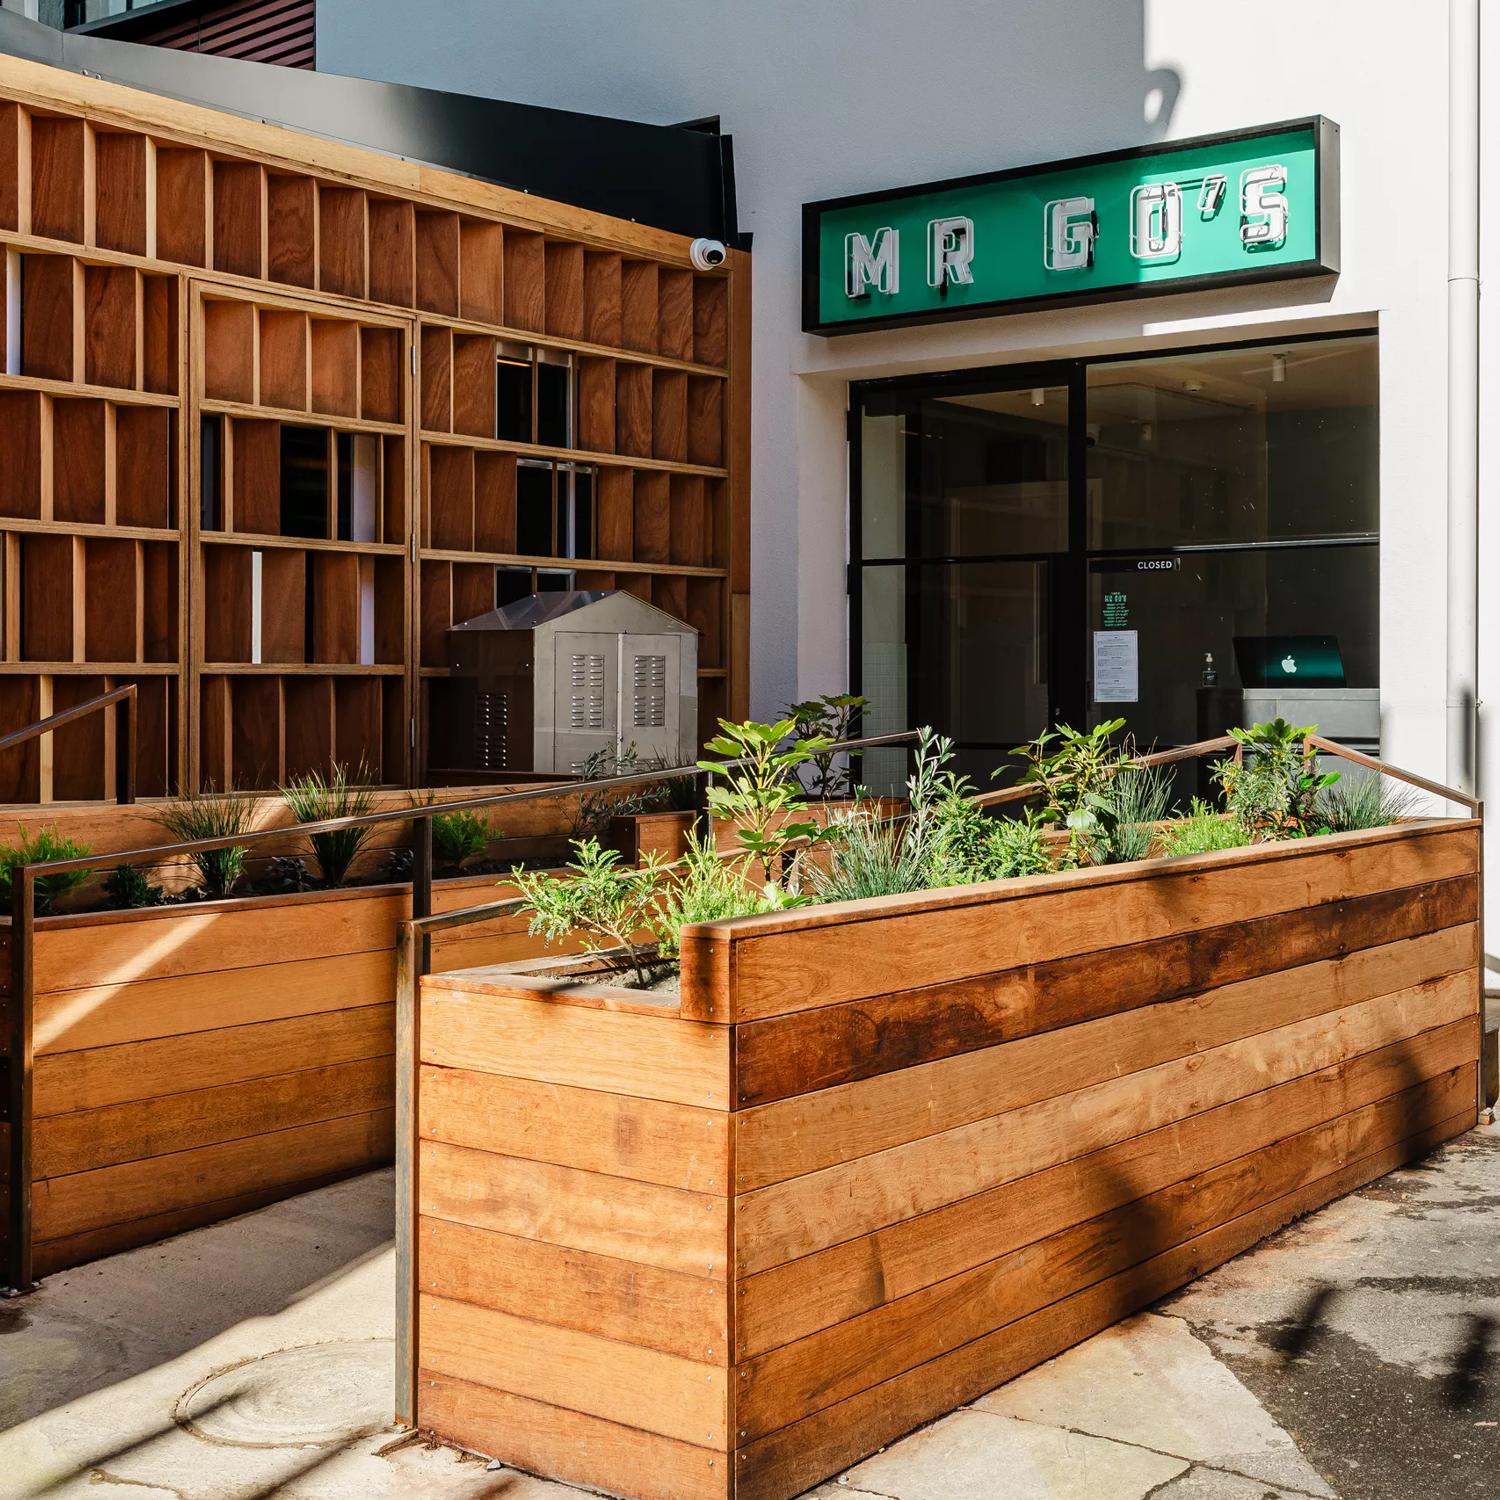 The front door of Mr Go's restaurant located on Eva Street in Wellington's city centre with wooden garden beds, white walls and a green sign.  